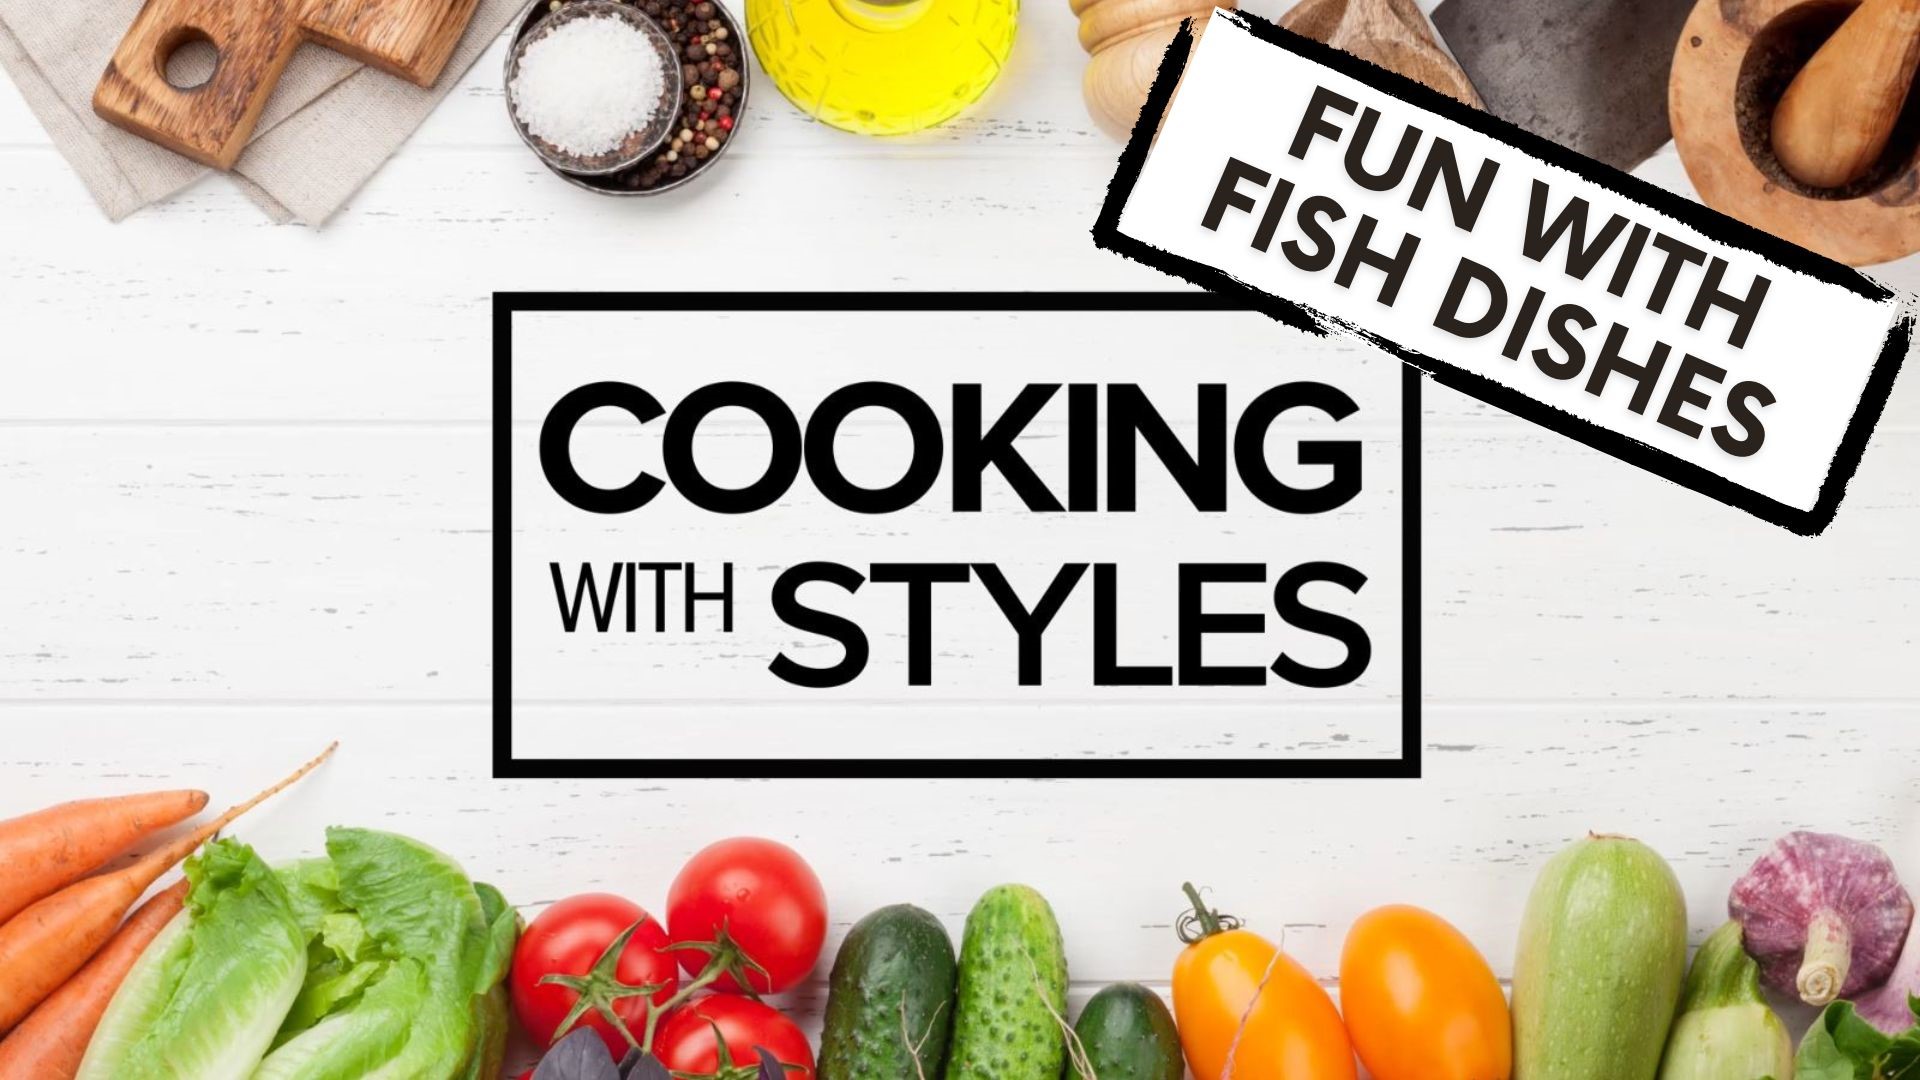 From a fish fry to recipes to keep your heart healthy, there are fish dishes for all. Shawn Styles shares his favorite ways to make salmon, halibut and more.